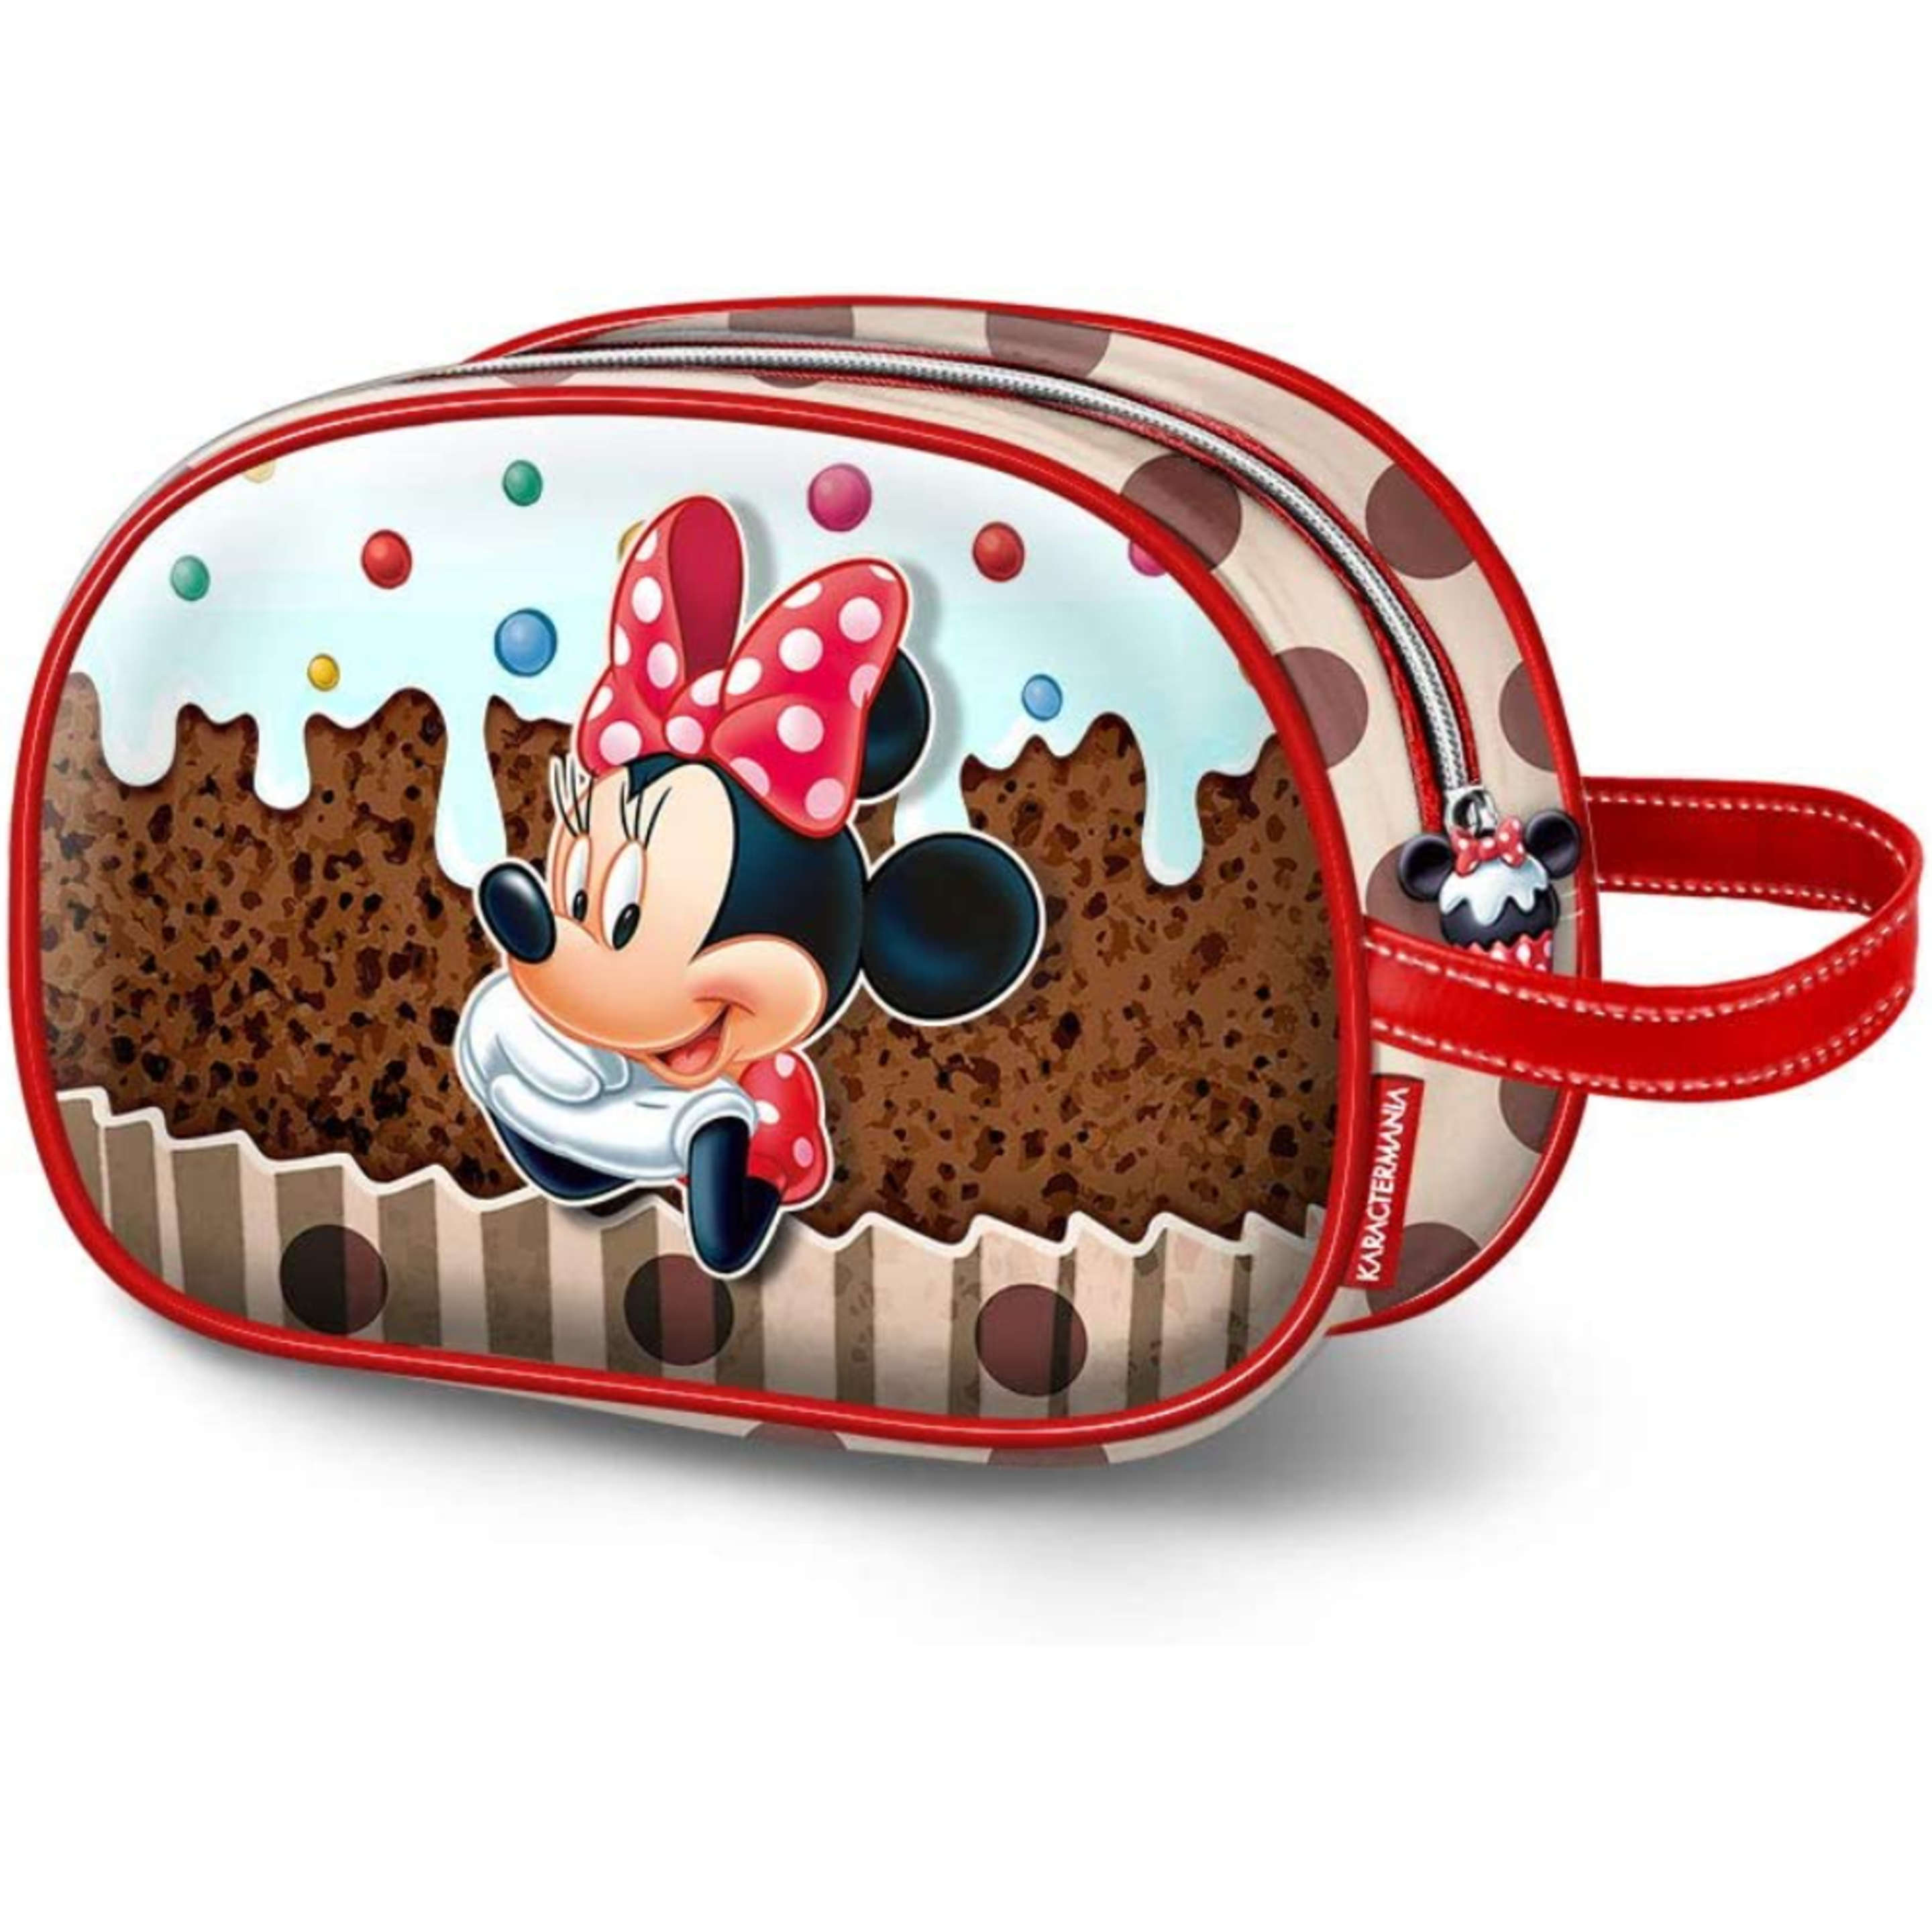 Neceser Minnie Mouse 72115 - rojo - 